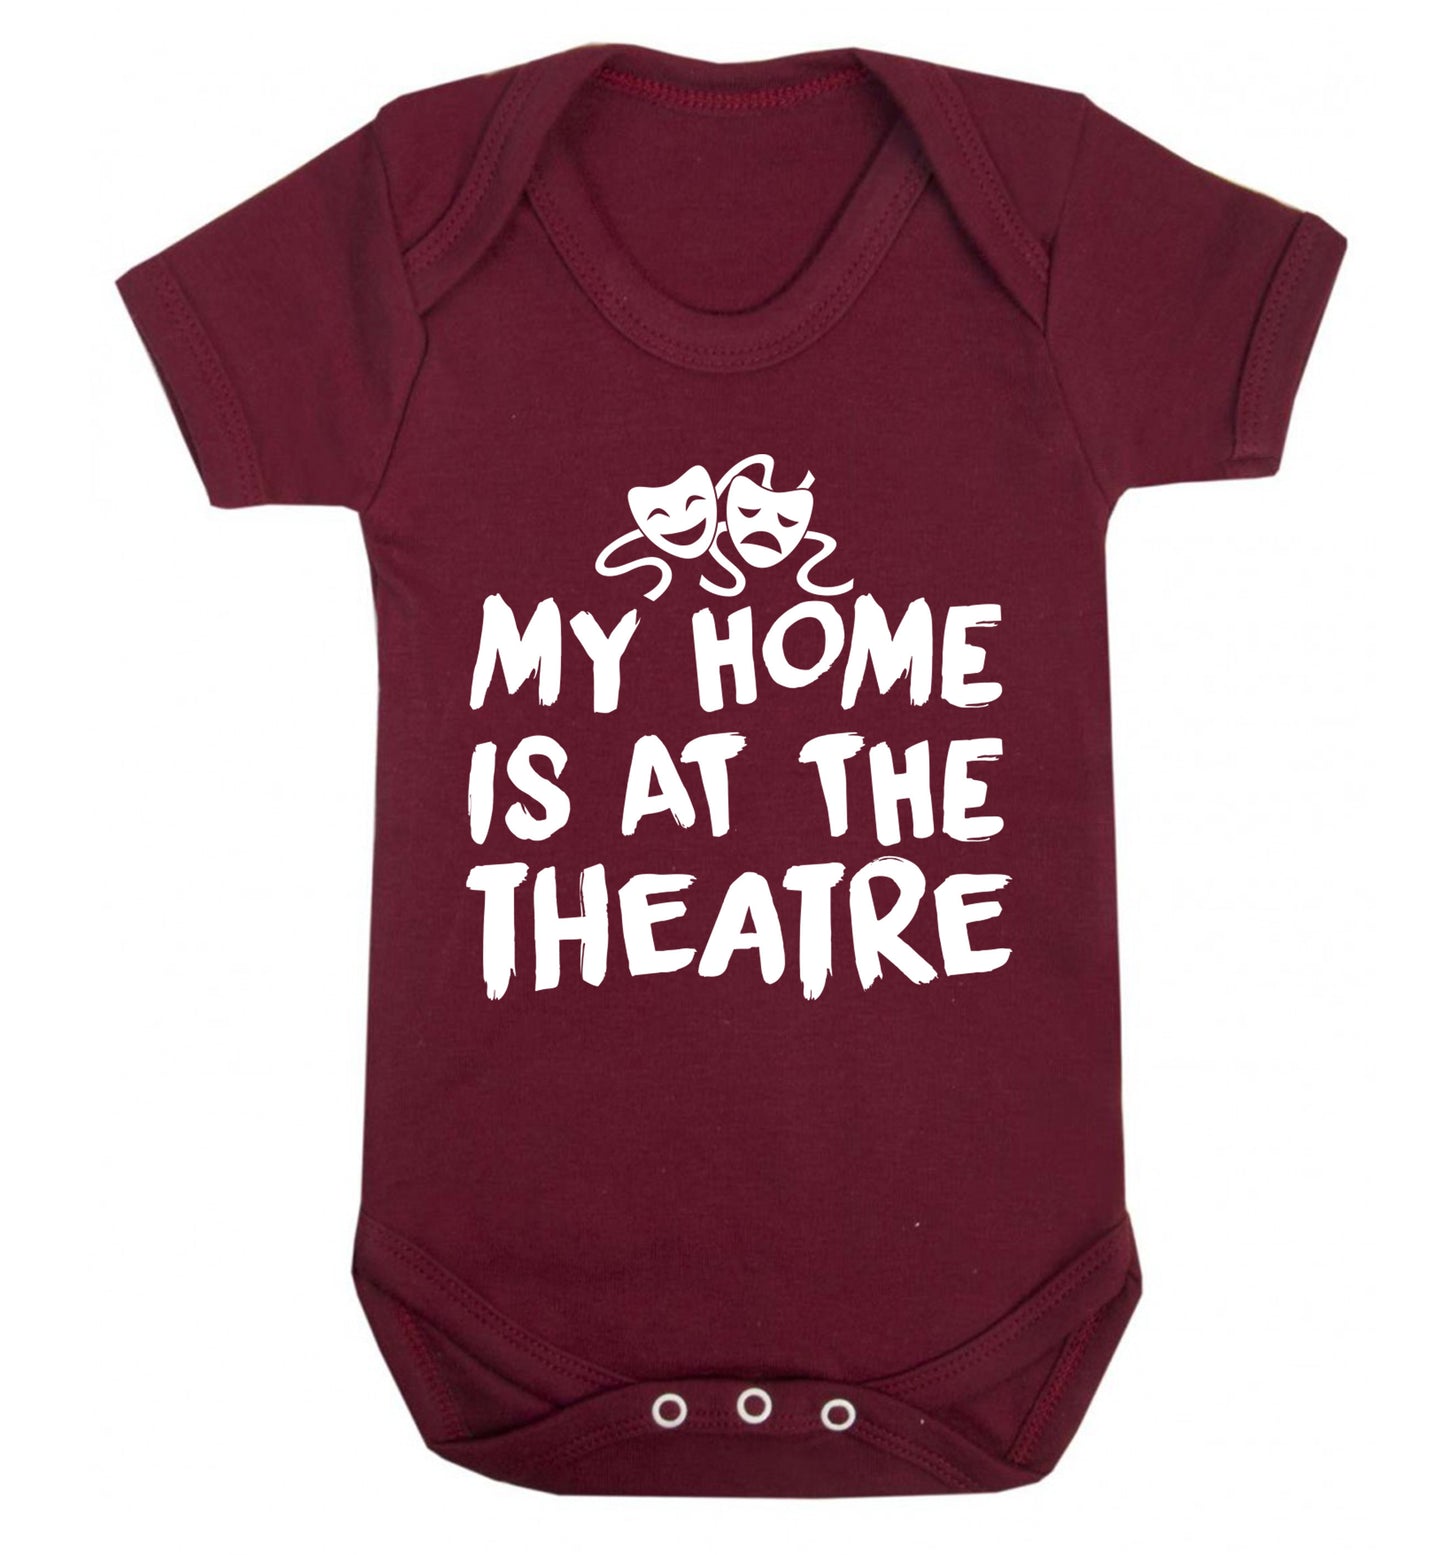 My home is at the theatre Baby Vest maroon 18-24 months